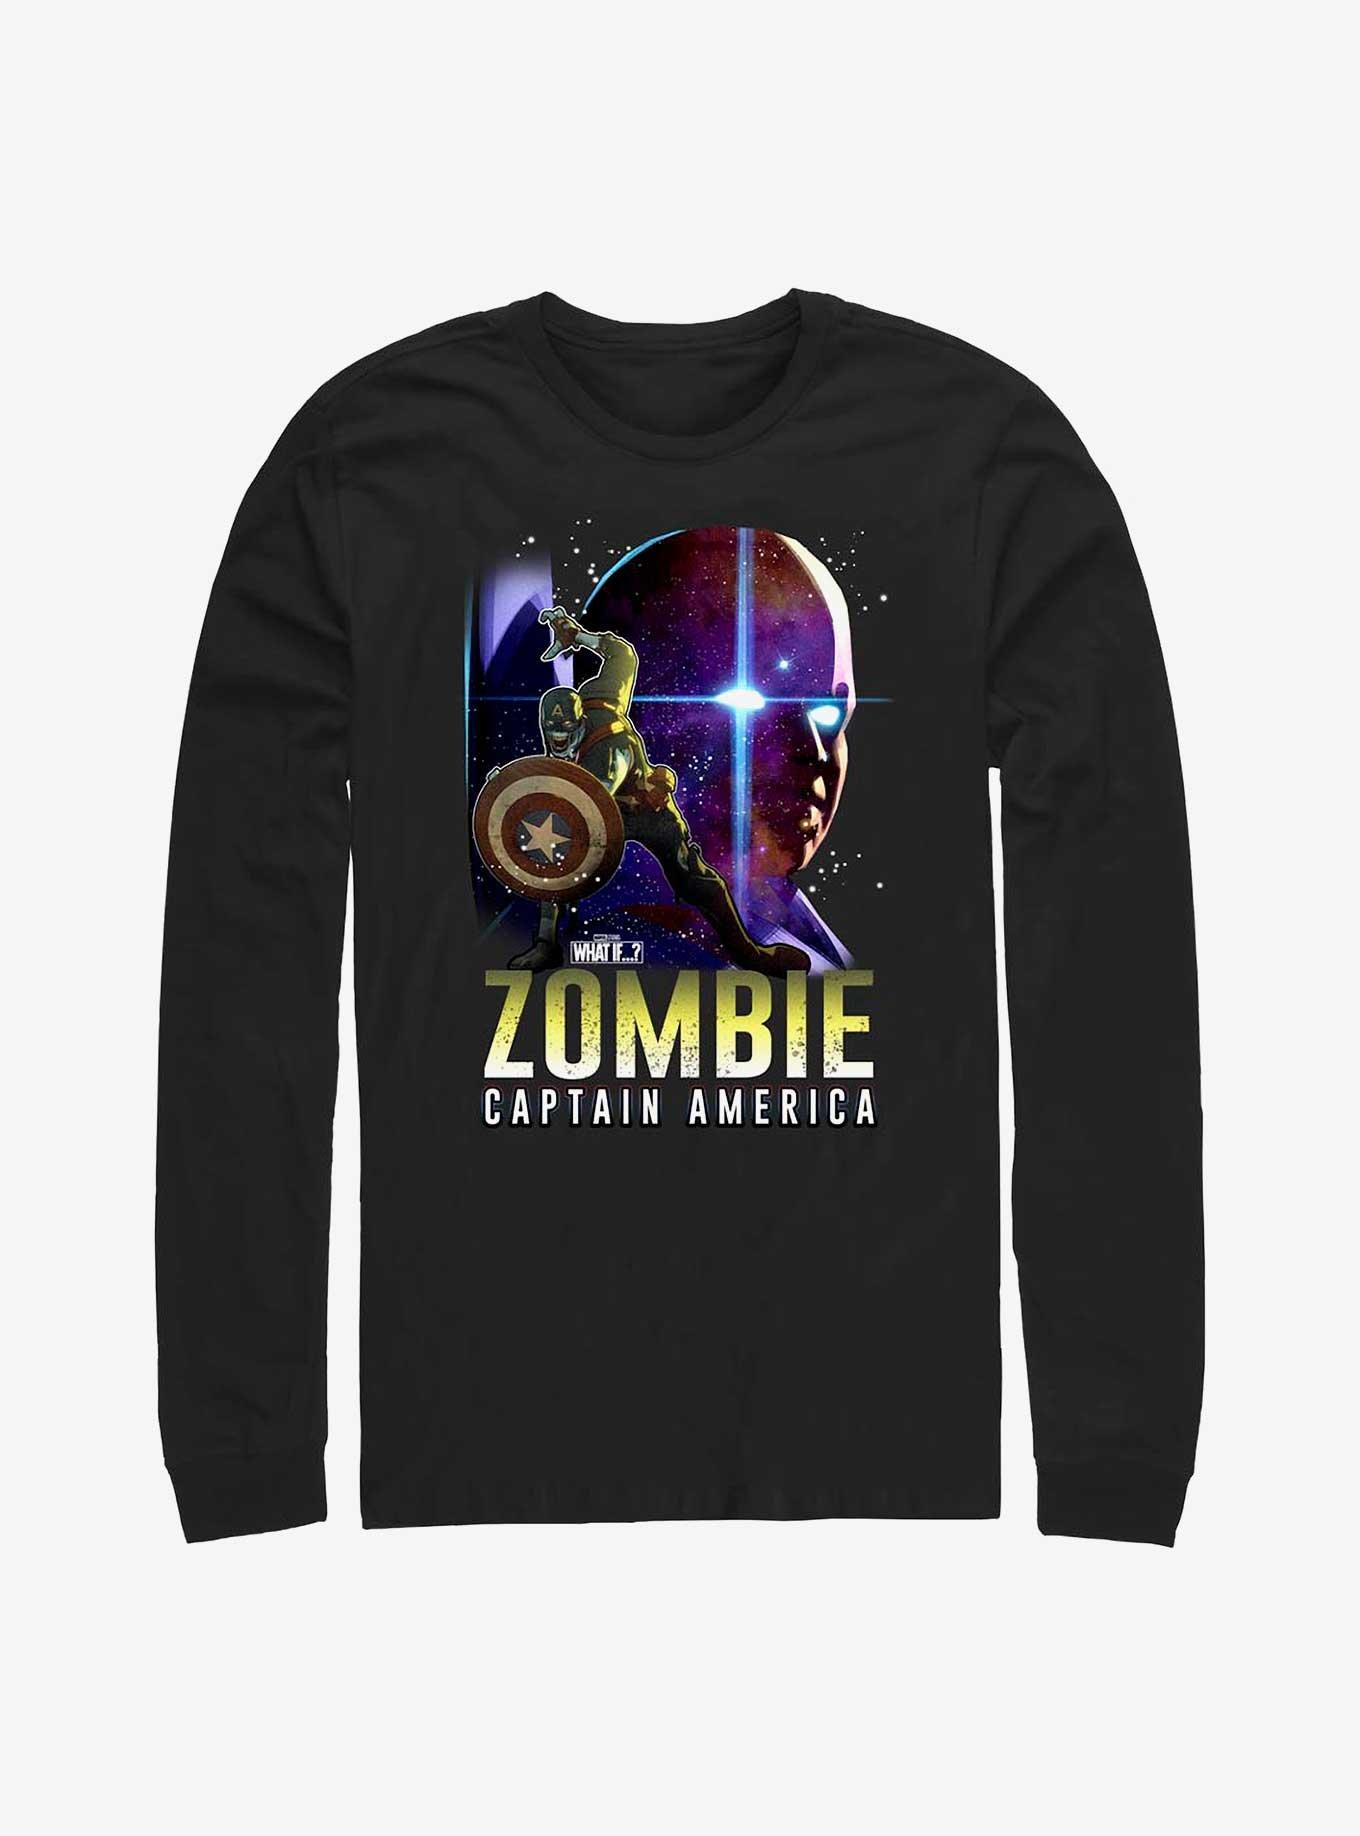 Marvel What If...? Zombie Captain America & The Watcher Long-Sleeve T-Shirt, BLACK, hi-res